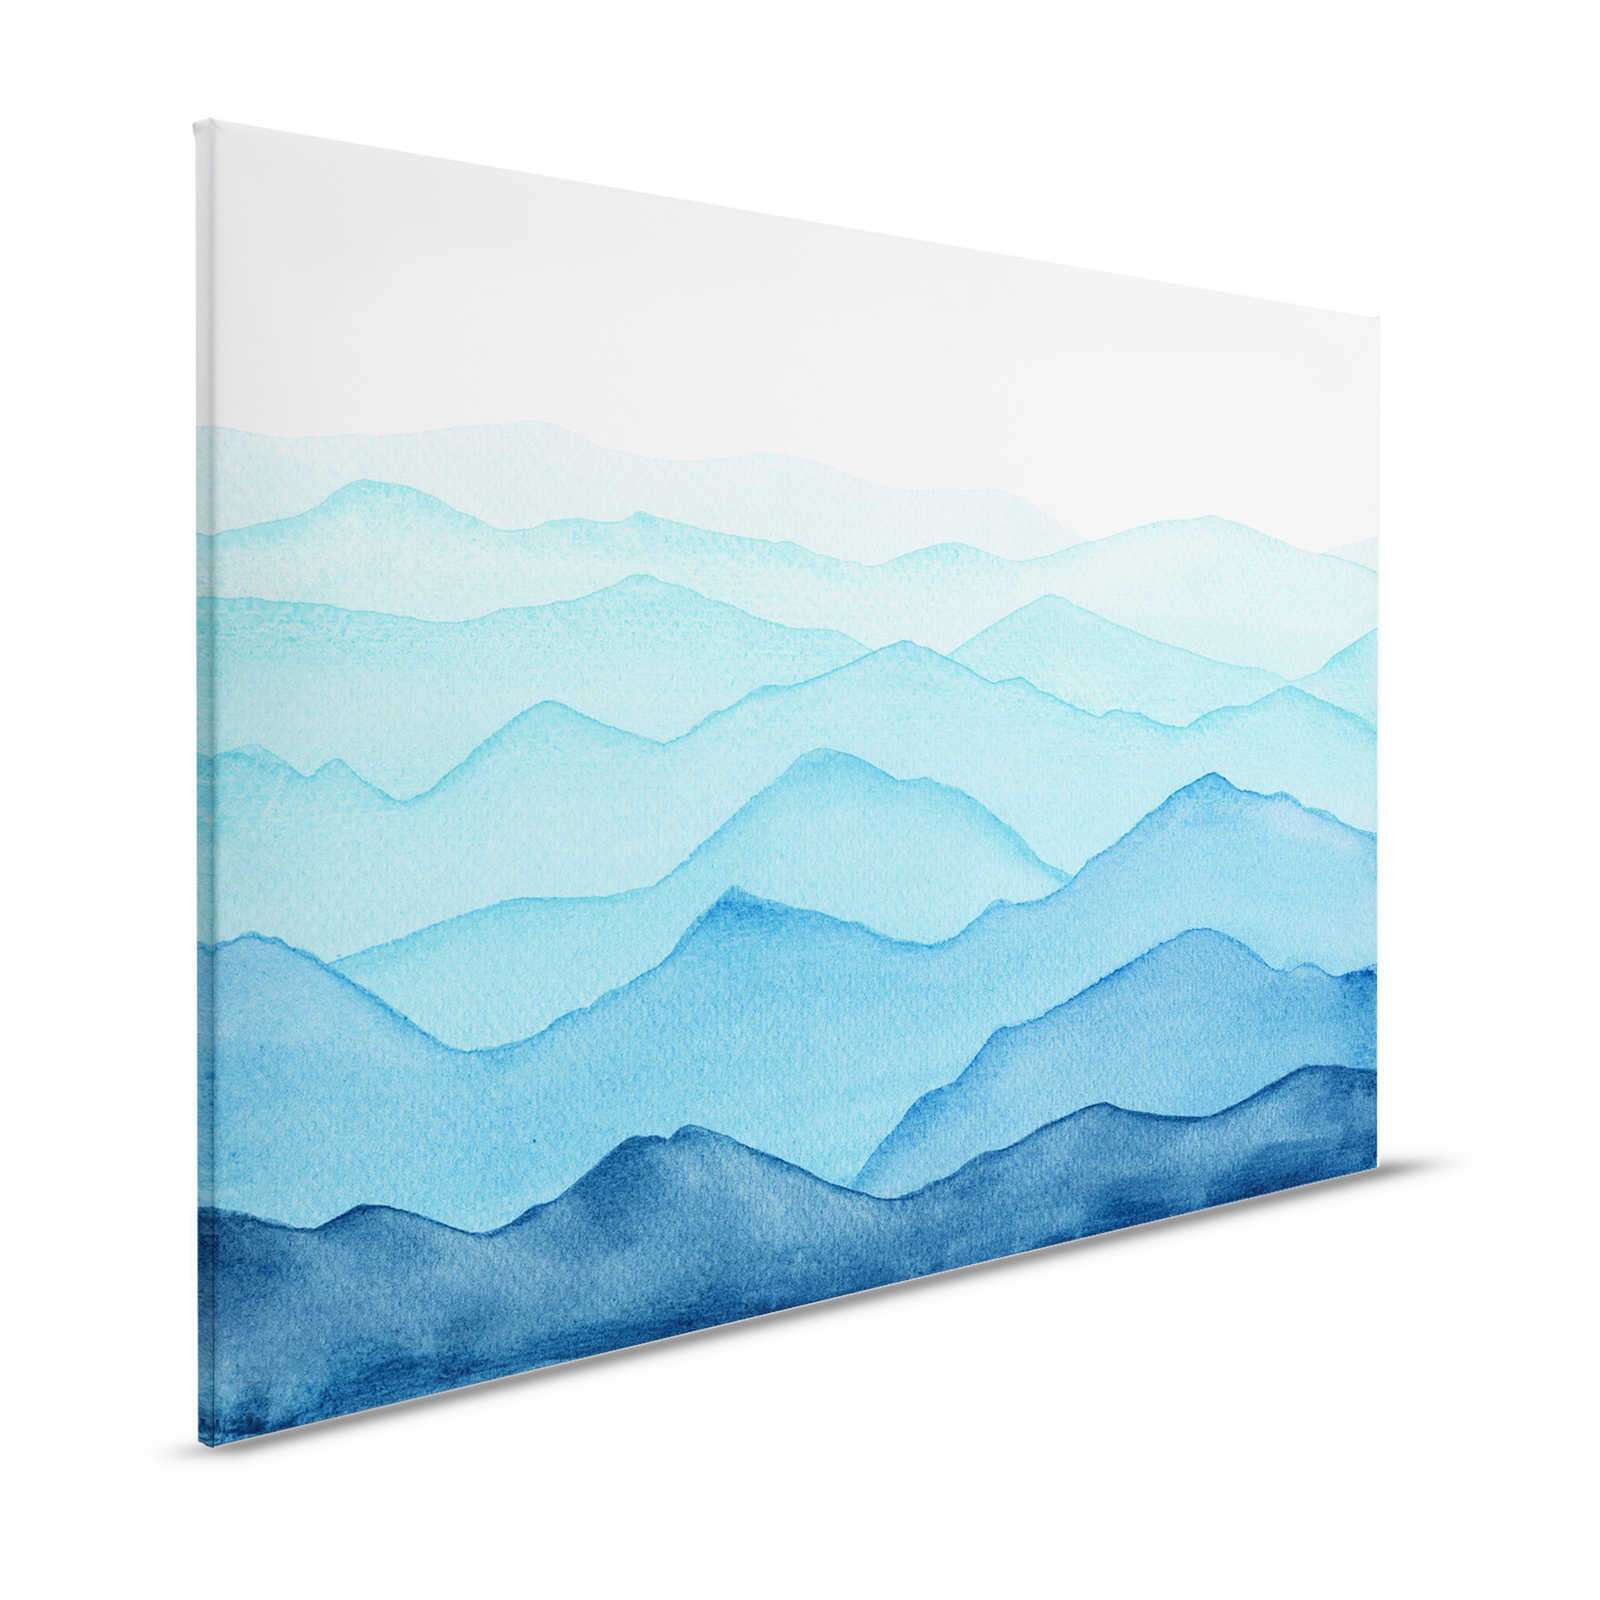 Canvas Sea with waves in watercolour - 120 cm x 80 cm
